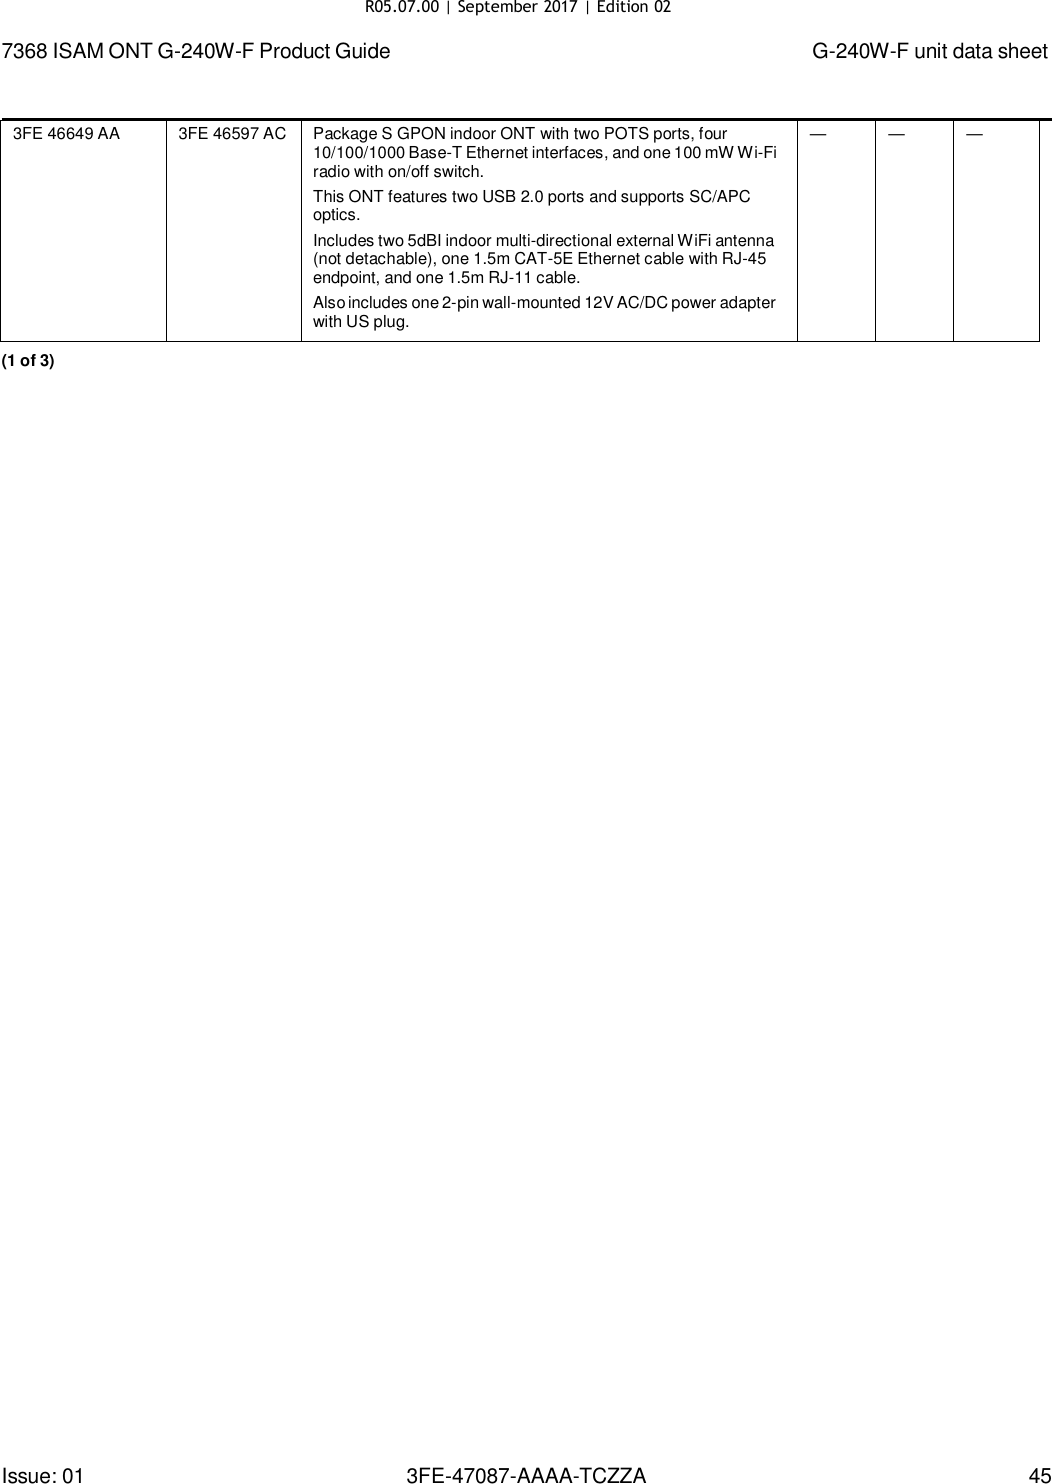 Page 42 of Nokia Bell G240WFV2 7368 ISAM GPON ONU User Manual 7368 ISAM ONT G 240W F Product Guide